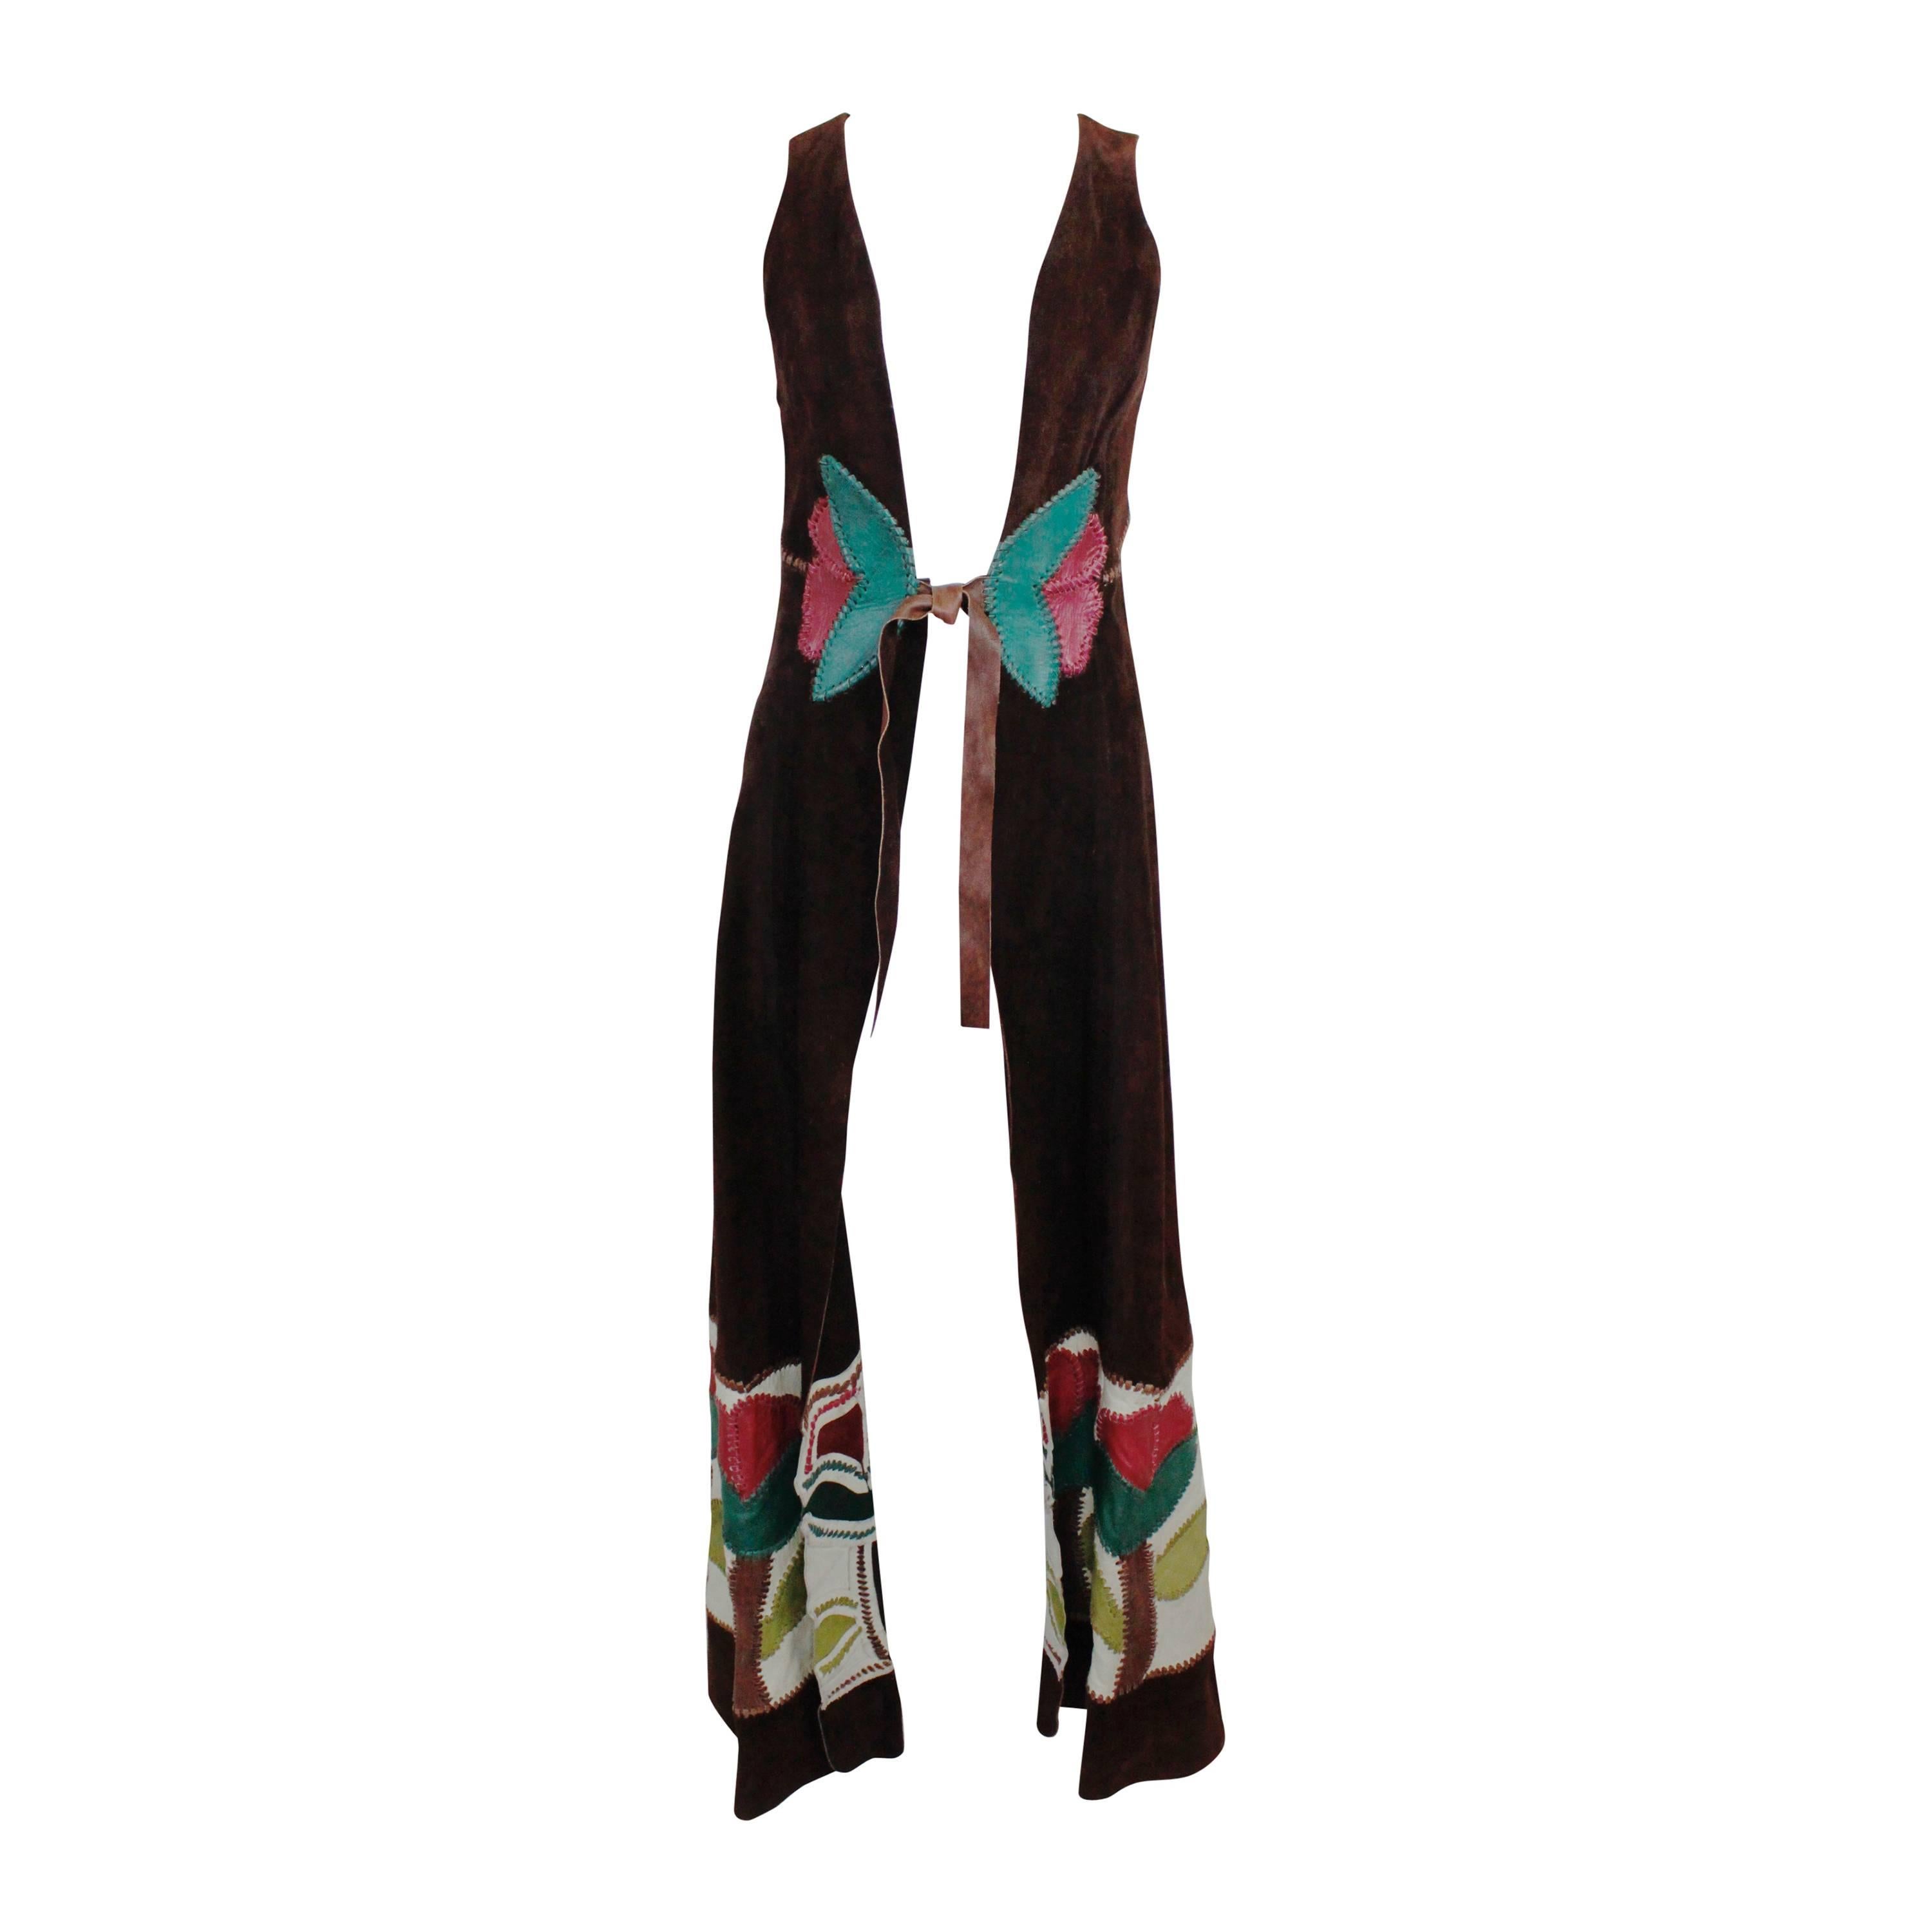 1970s Char Suede Vest with Patchwork Appliqué and Leather Binding